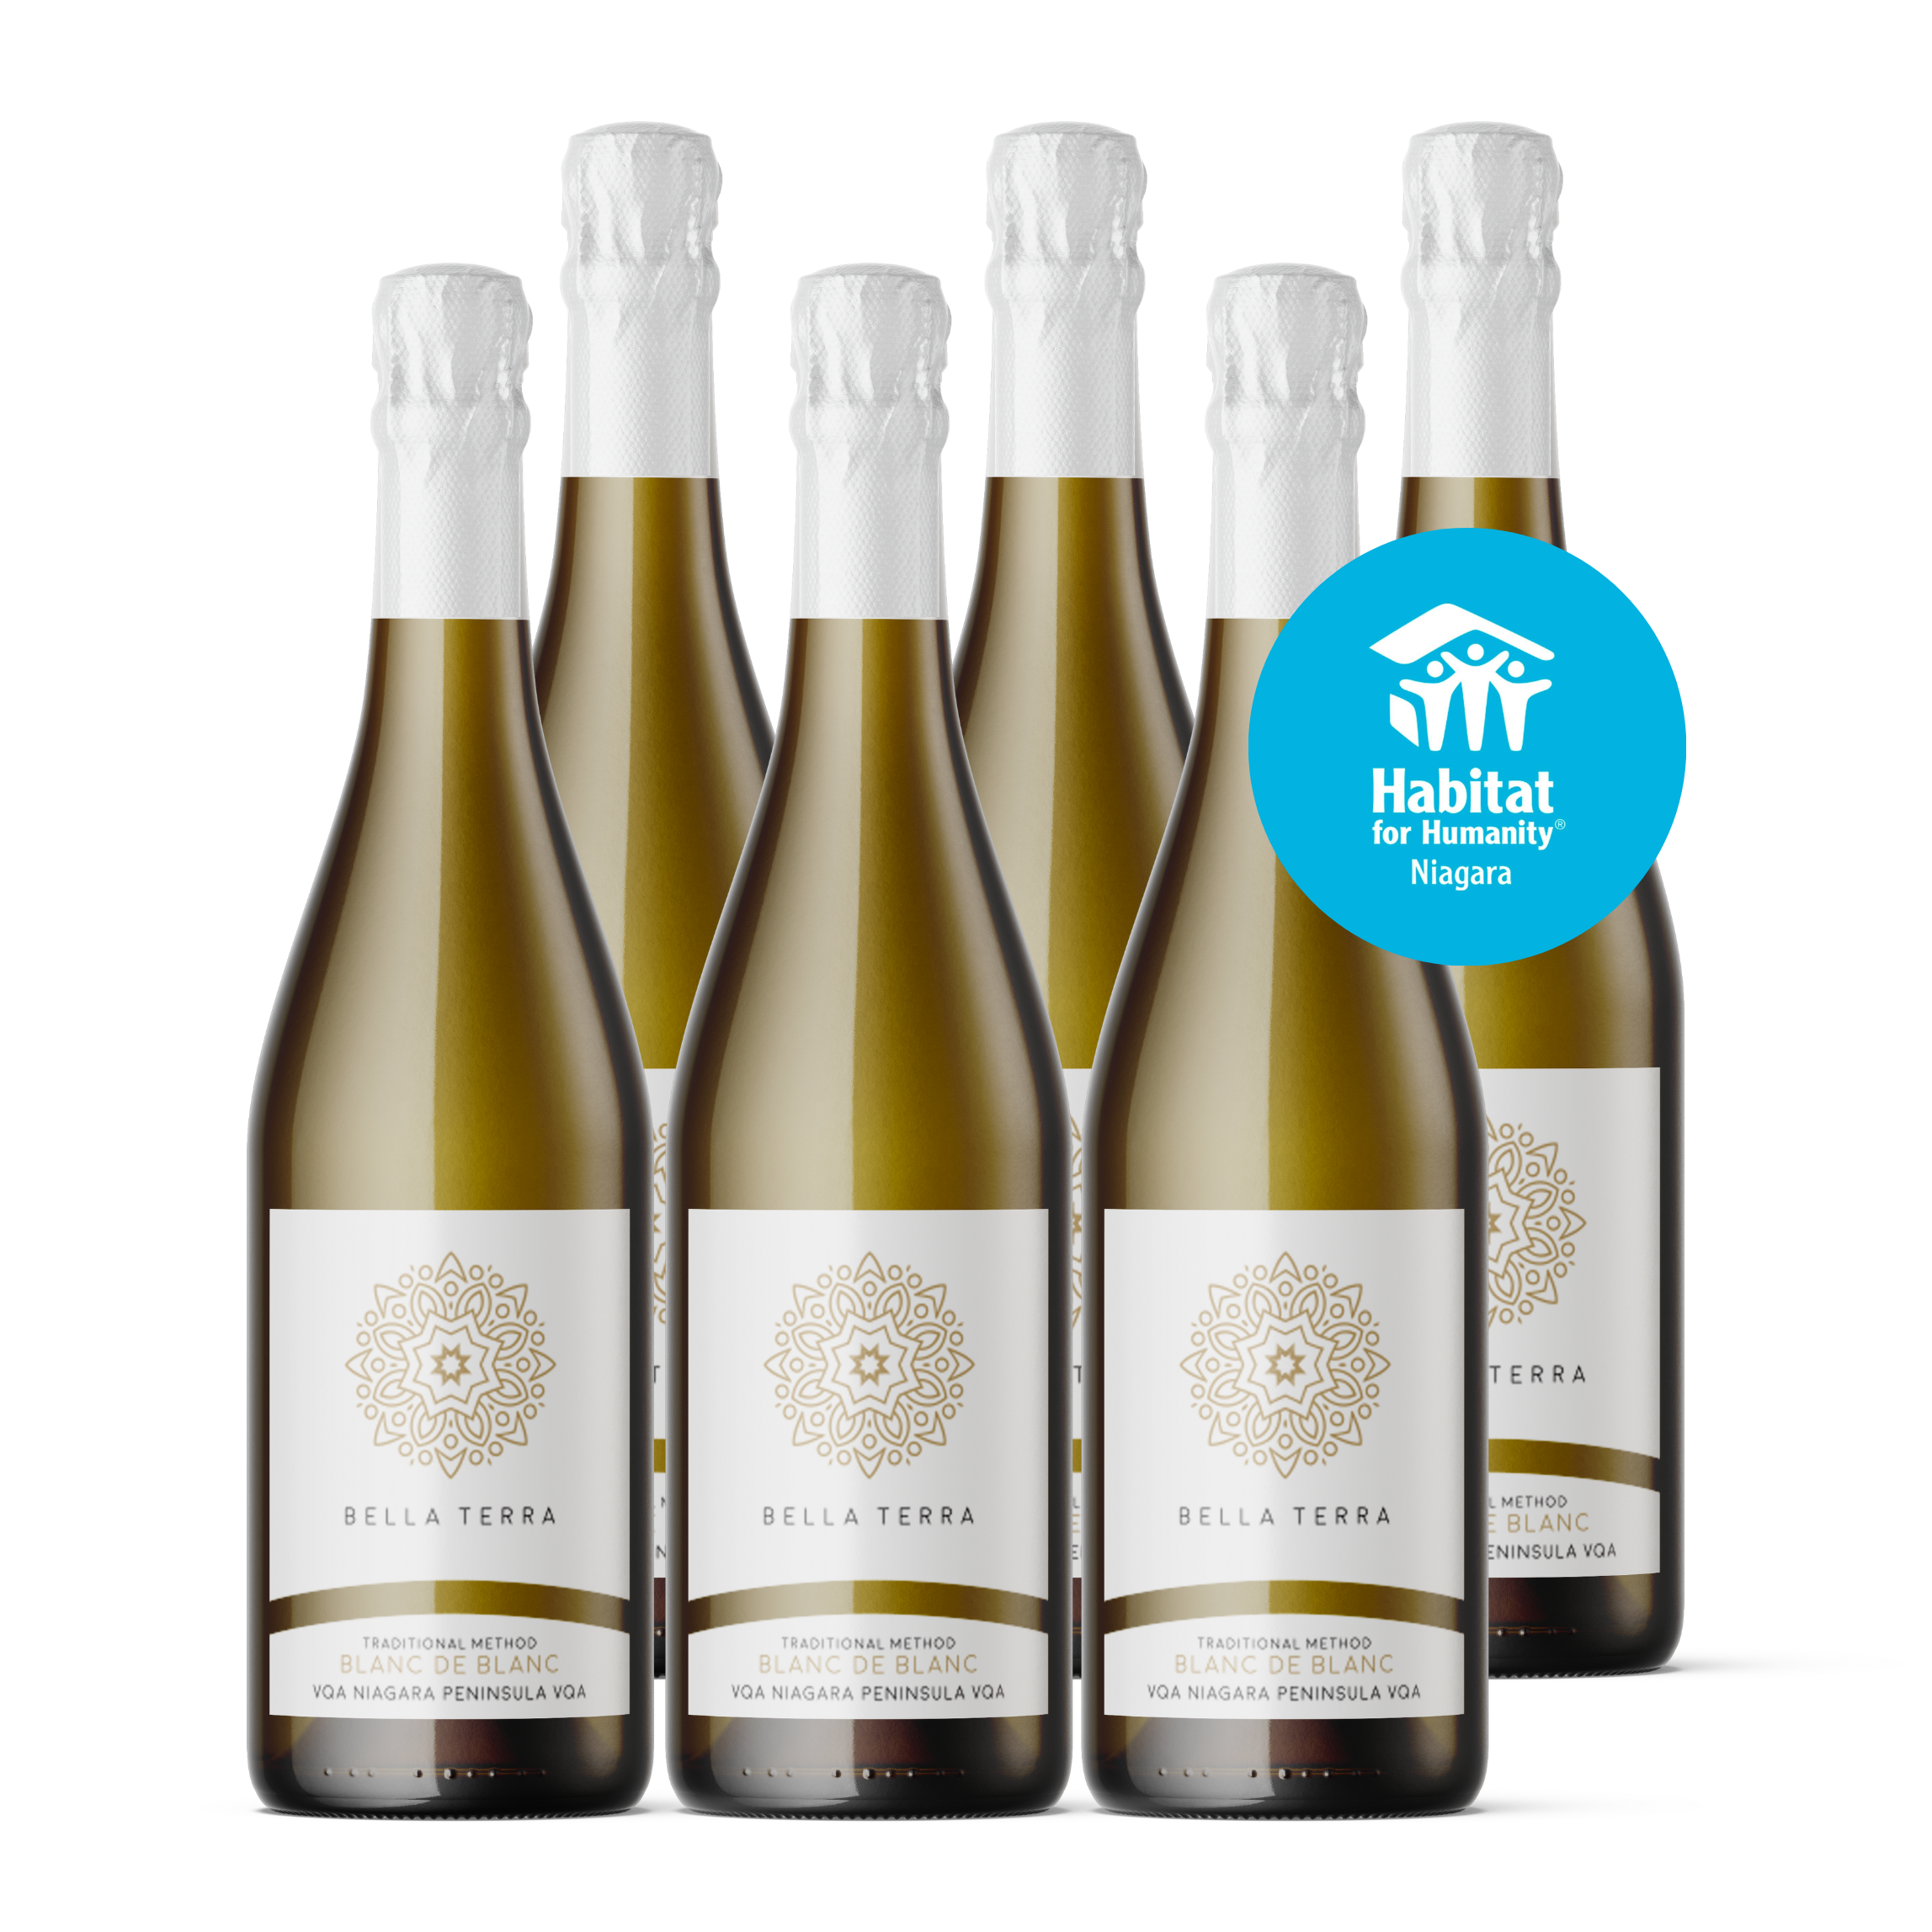 Habitat For Humanity Blanc de Blanc 6 Pack (Includes $30 Donation)